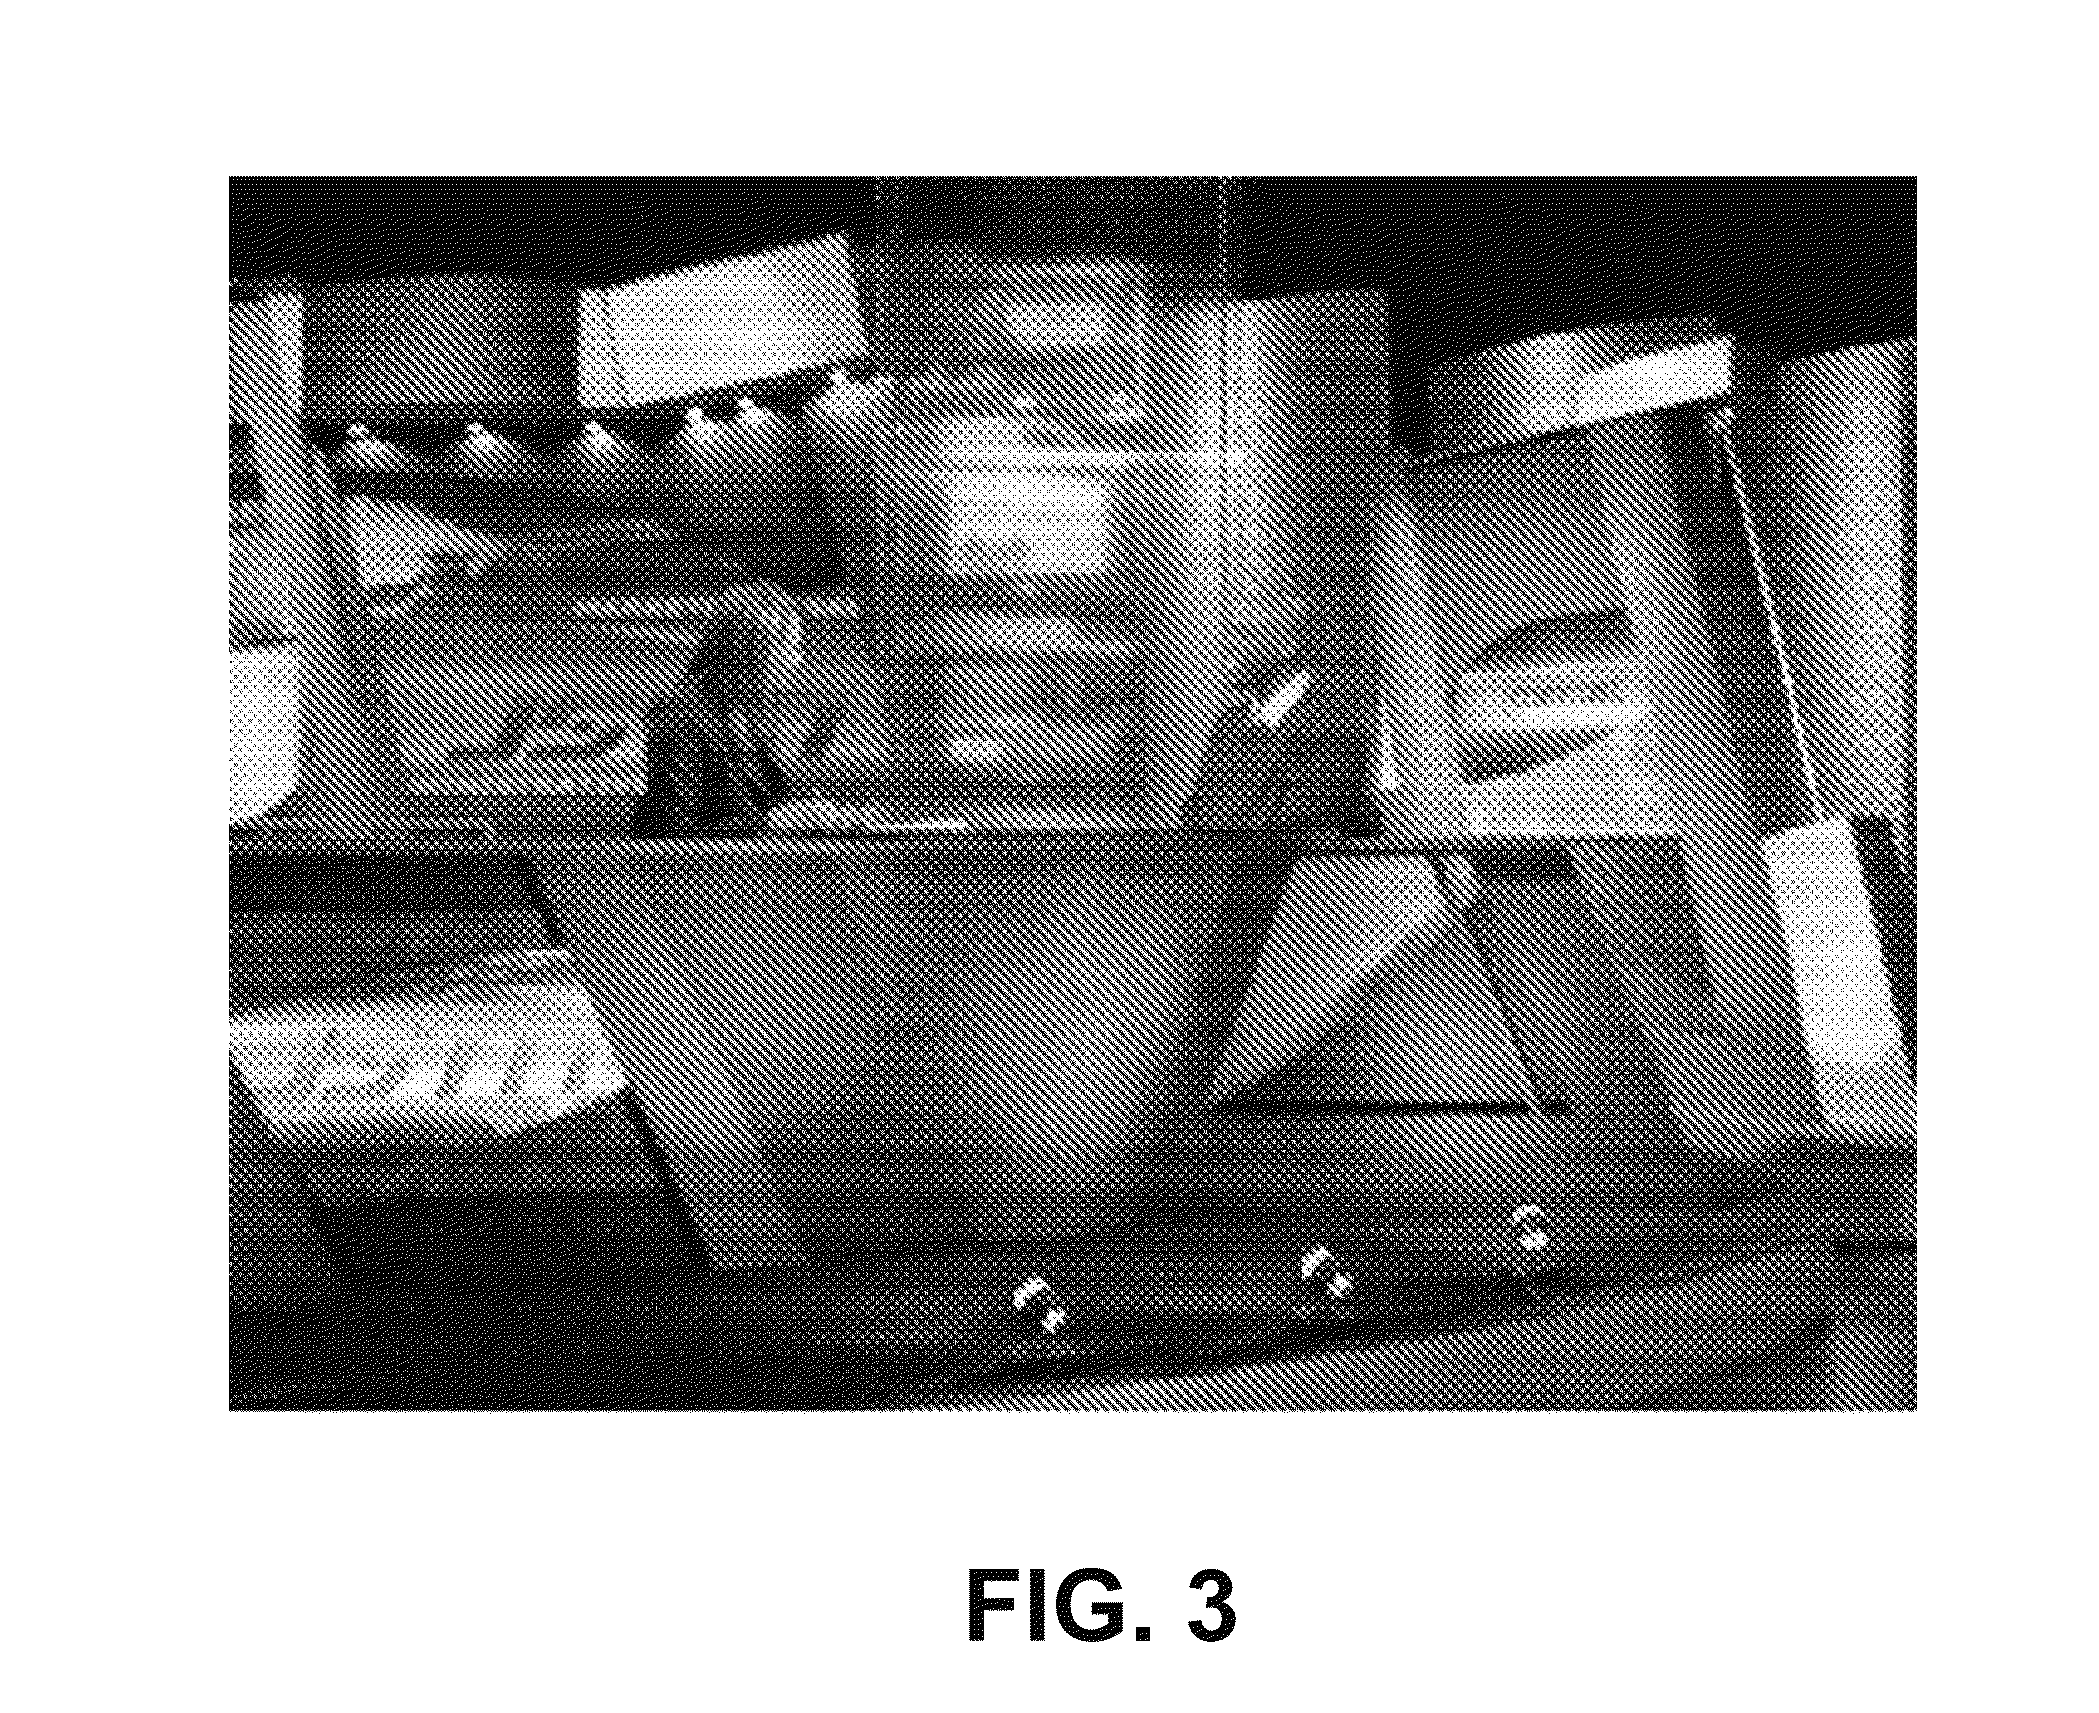 System and method for providing visual job information and job seeker's information